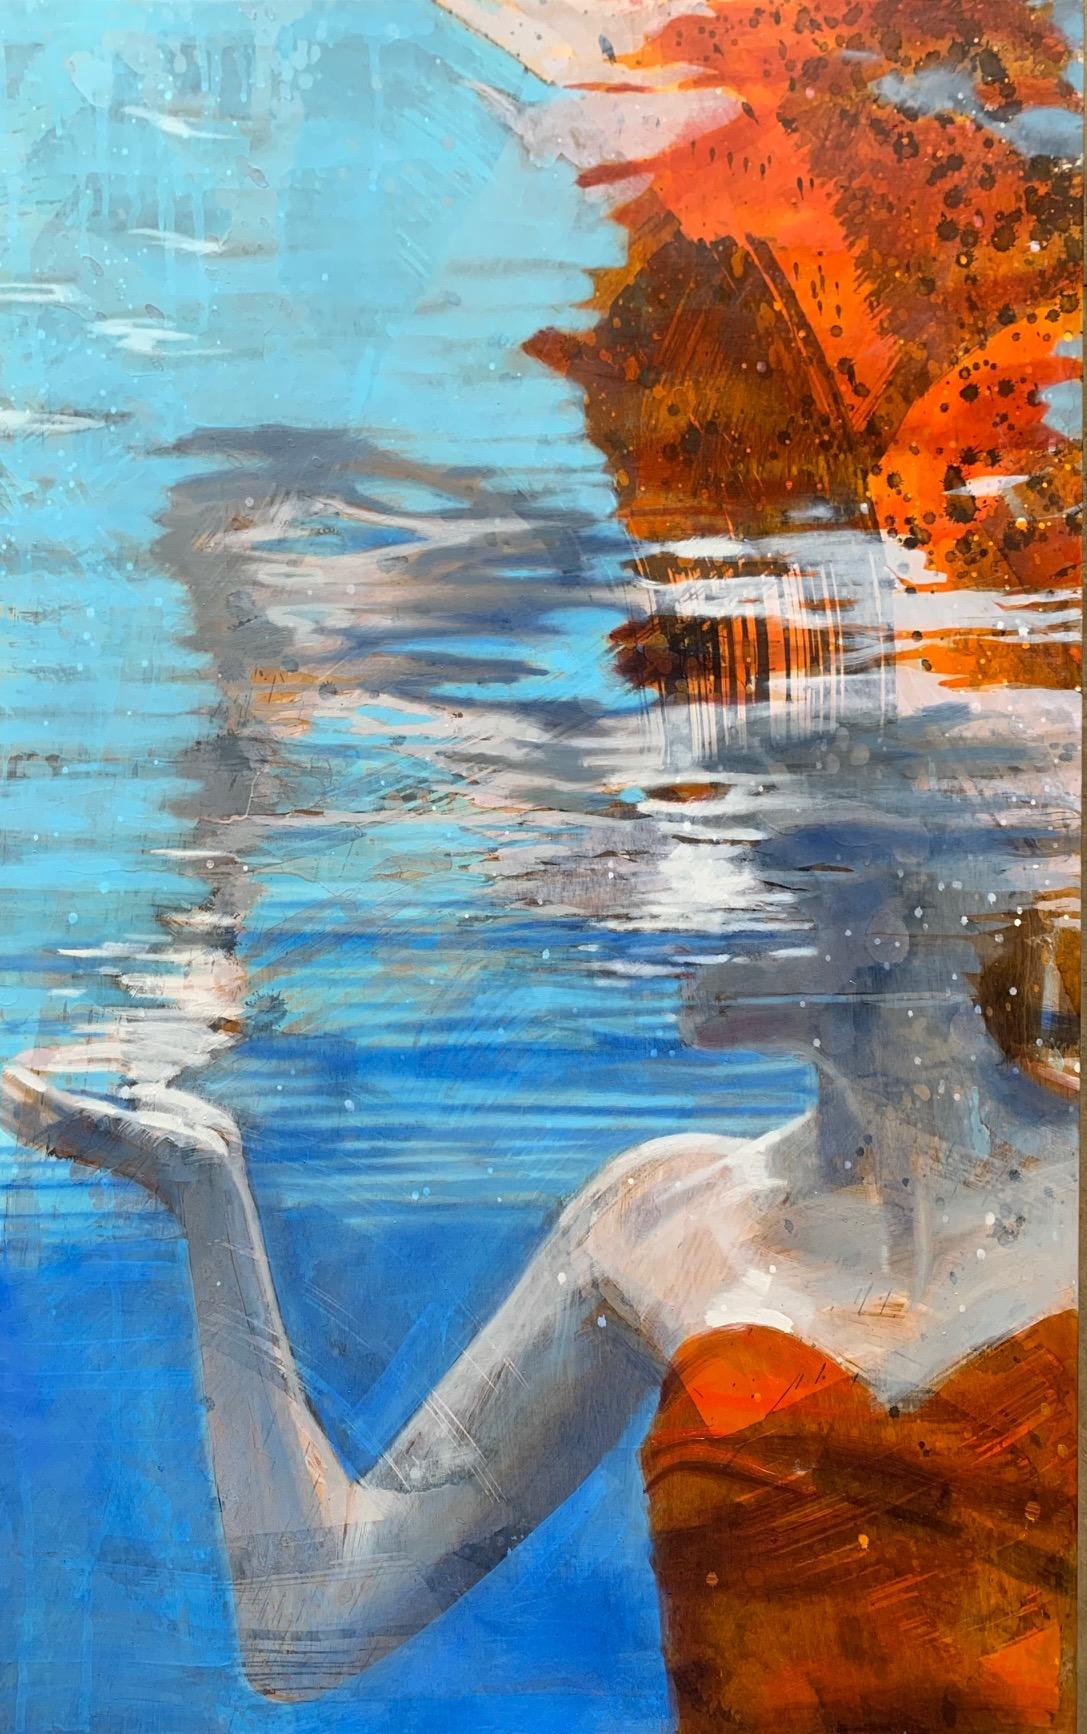 Carol Bennett Figurative Painting - "Still Water" Bright red and blue scene of swimmer on water surface on panel.